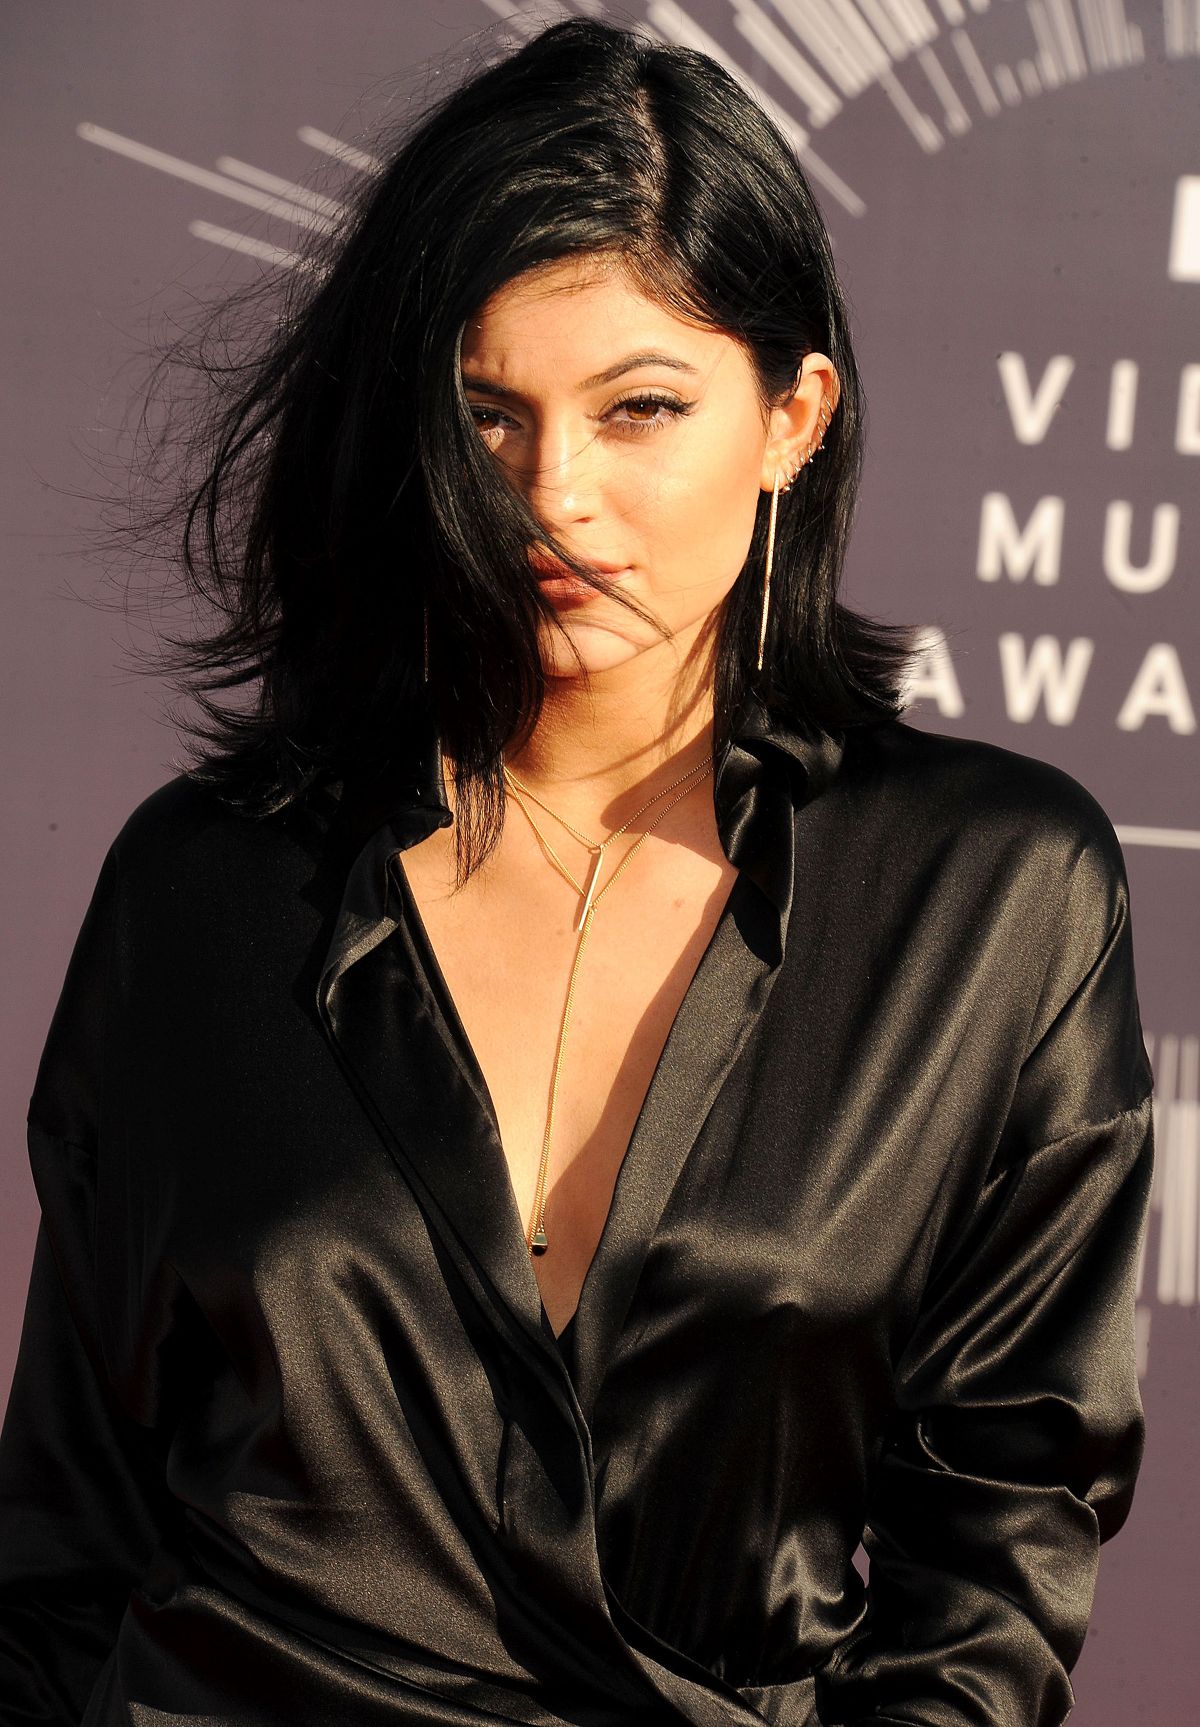 Kylie Jenner in Video Music Awards 2014